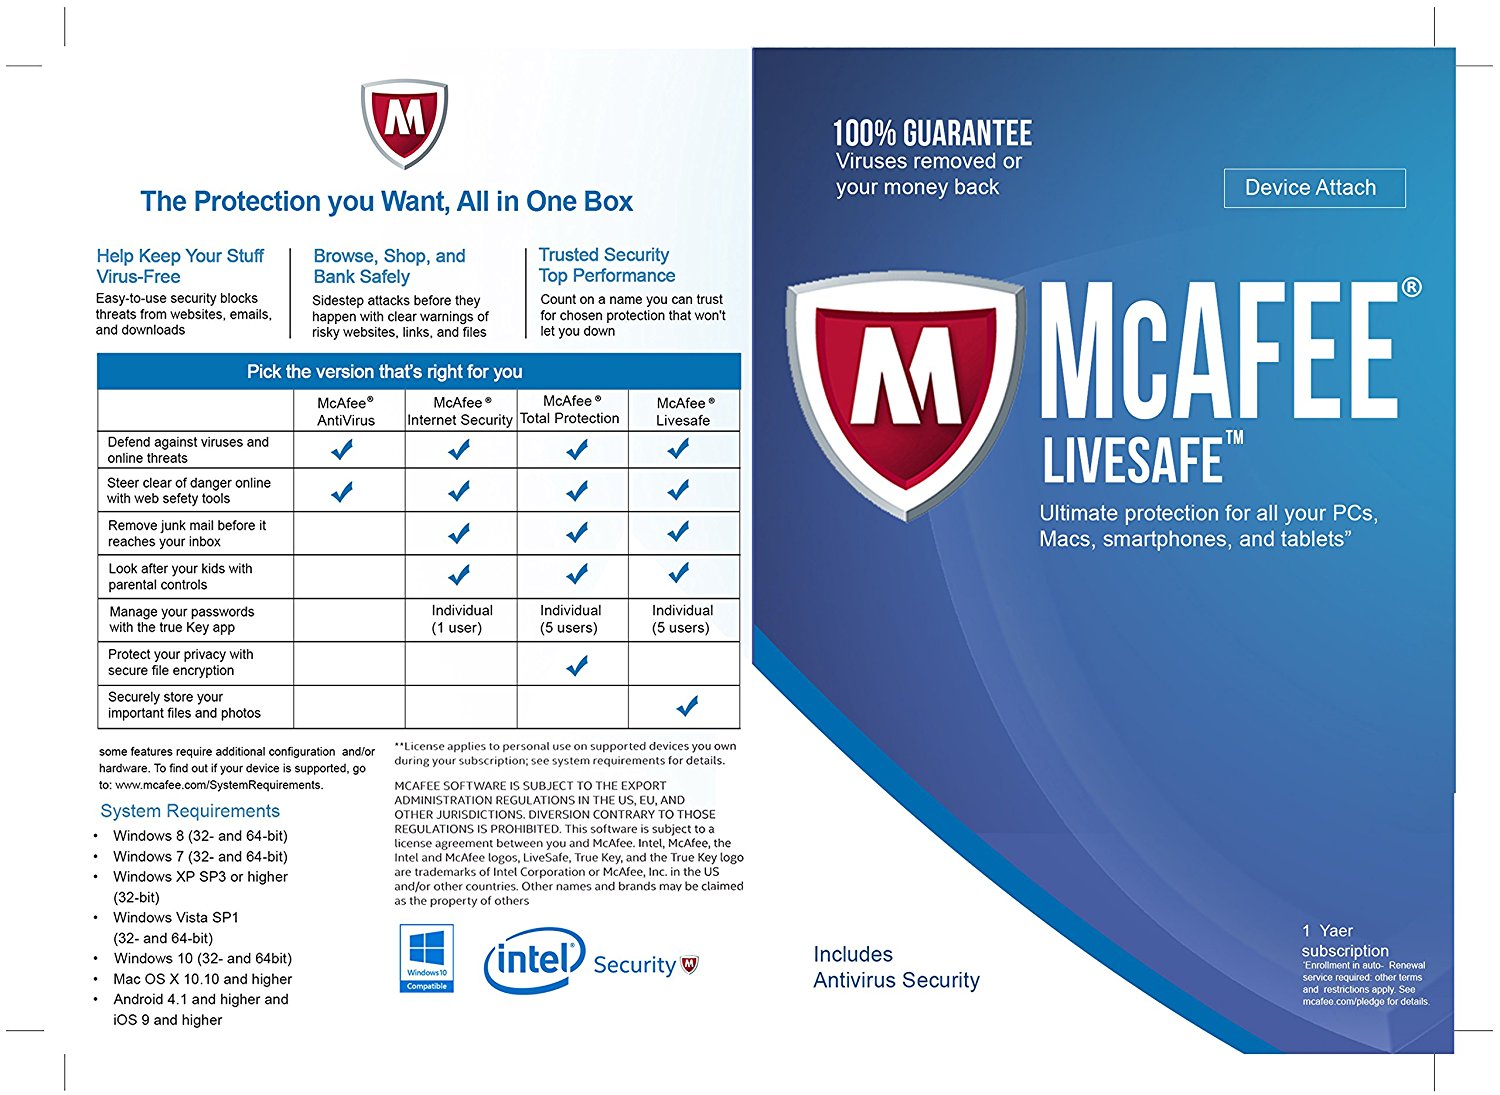 mcafee internet security for mac